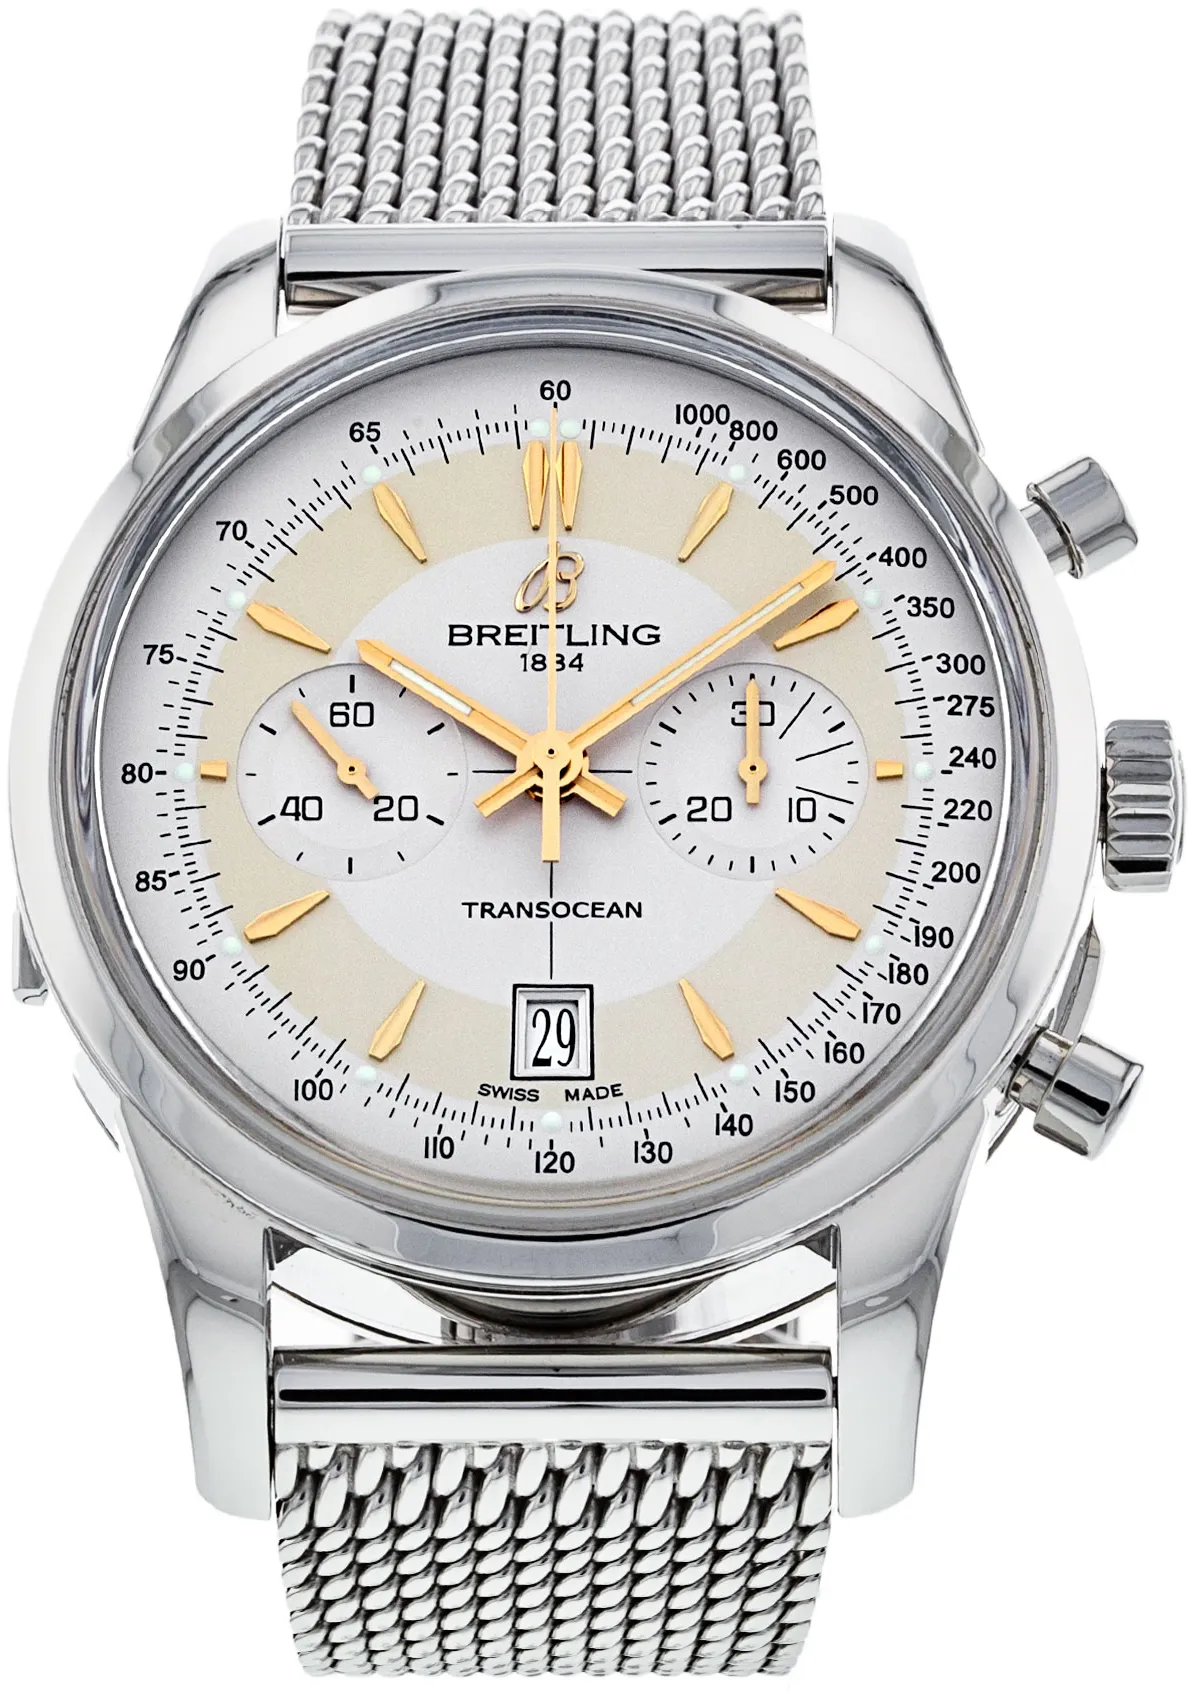 Breitling Transocean AB0154 43mm Stainless steel